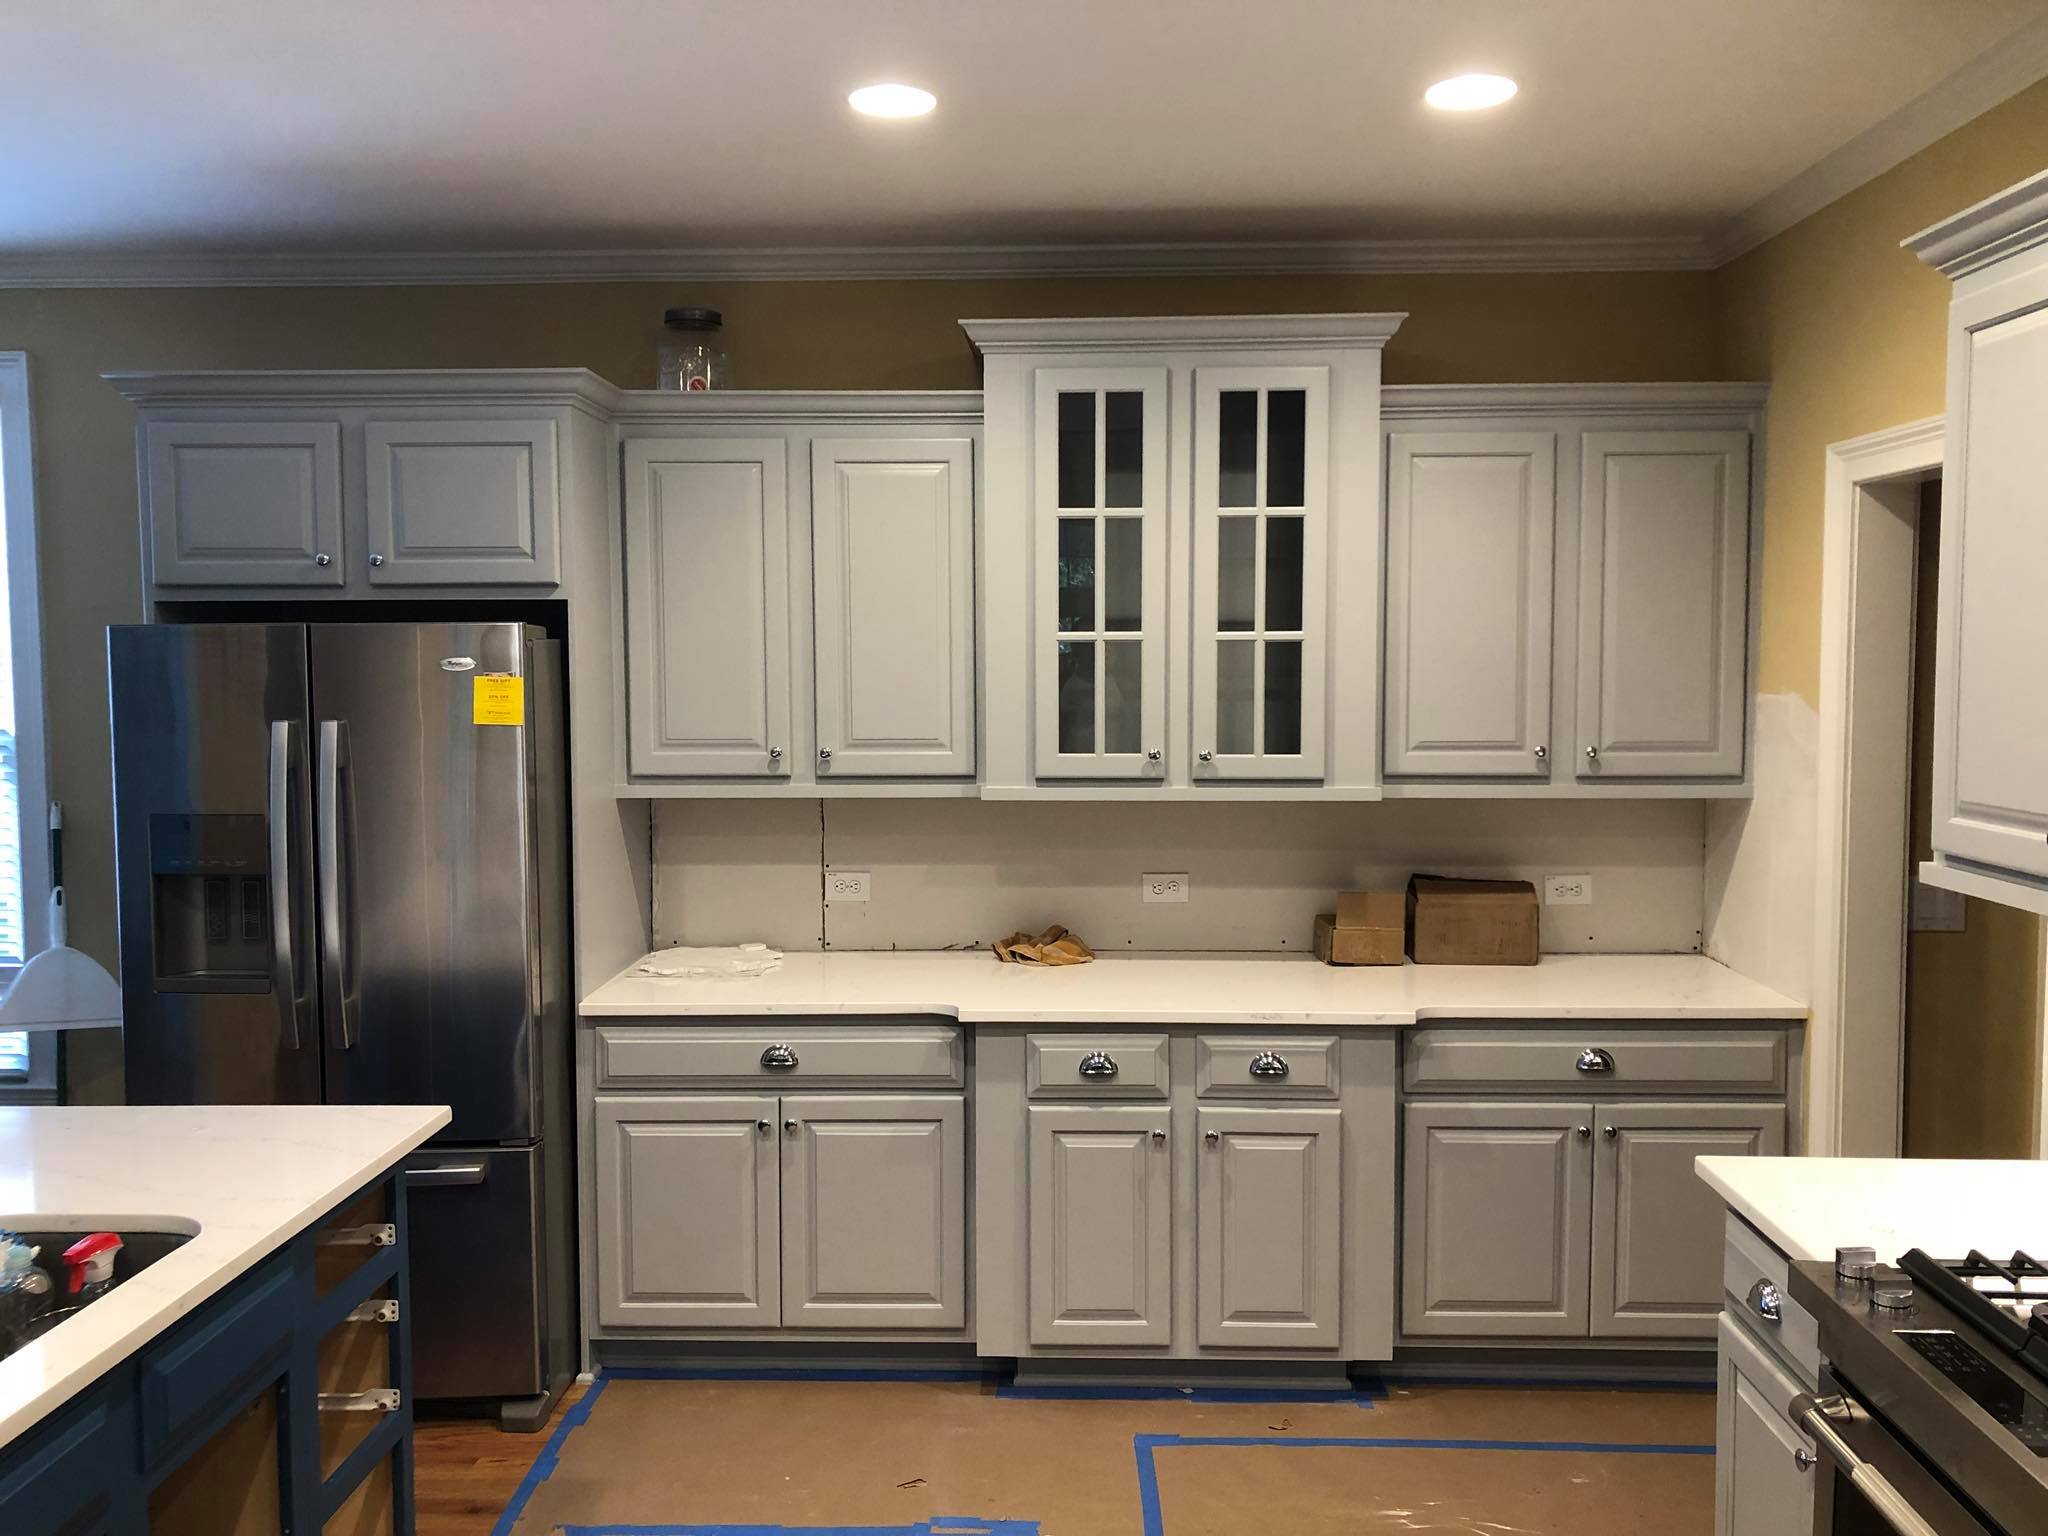 Full Kitchen Remodeling with Upper and Lower Cabinets Painted White Front View